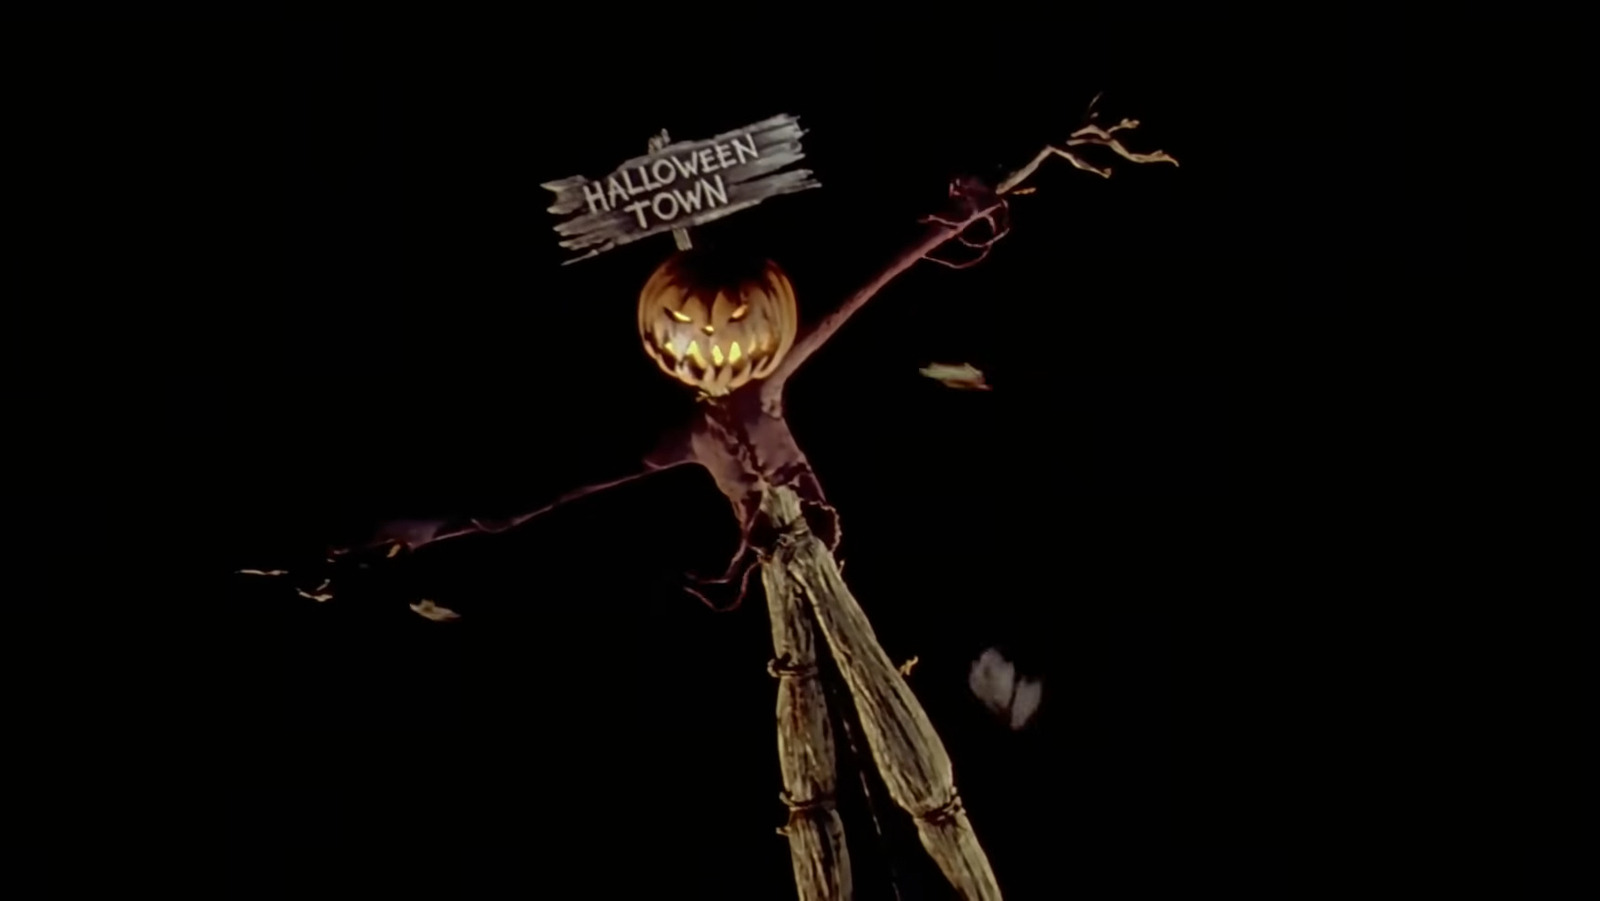 Why The Pumpkin King Version Of Jack Skellington Didn't Make It Into Disney's Archives